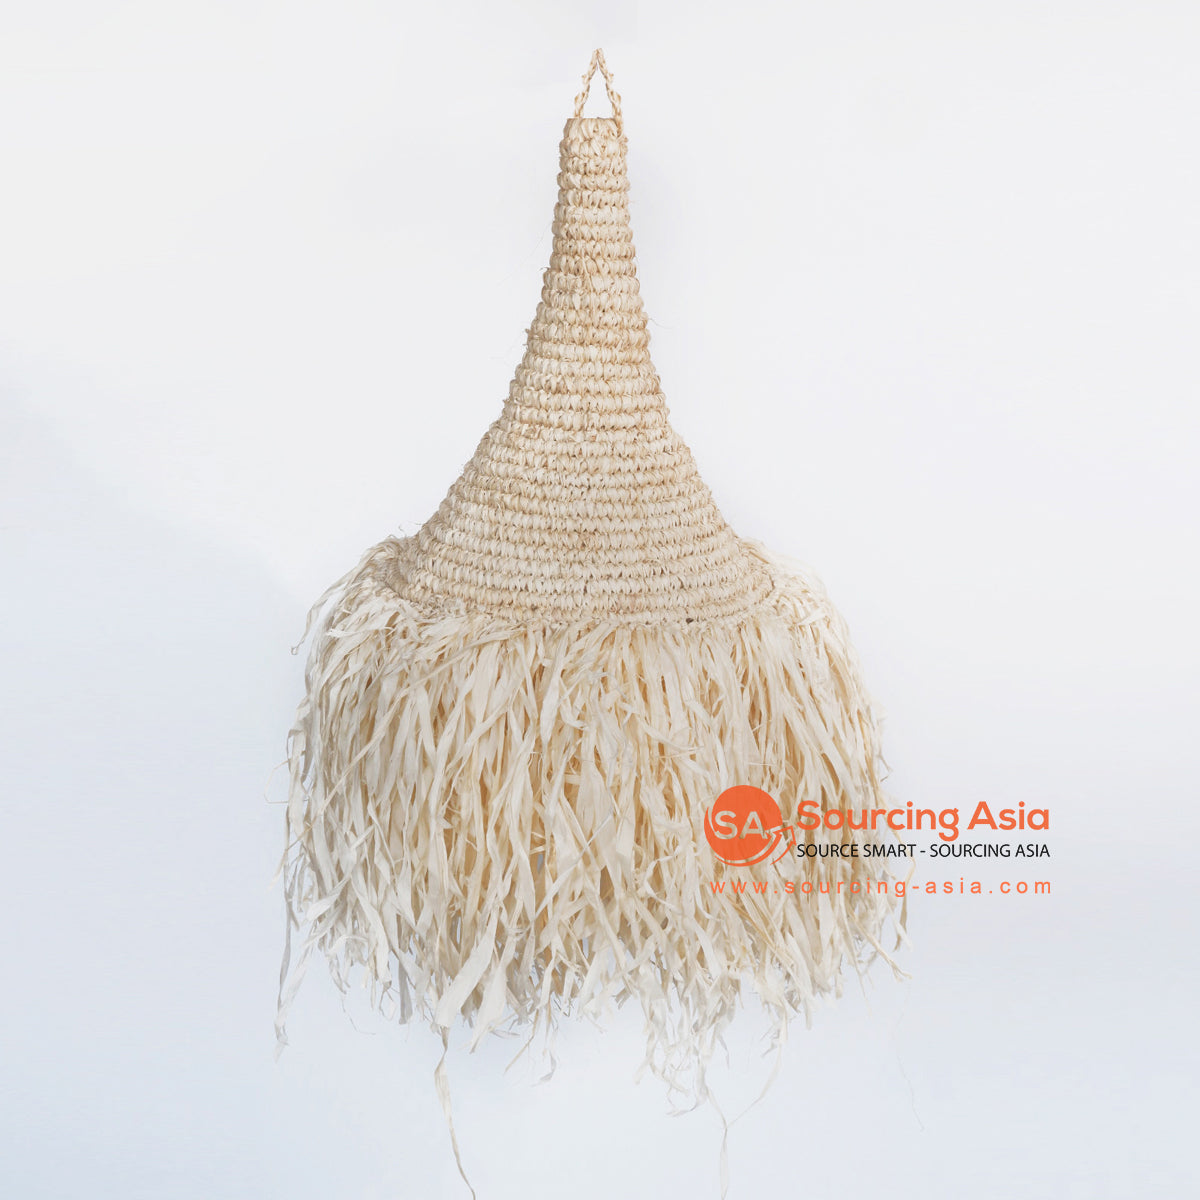 MRC297 NATURAL WOVEN MENDONG PENDANT LAMP WITH FRINGE